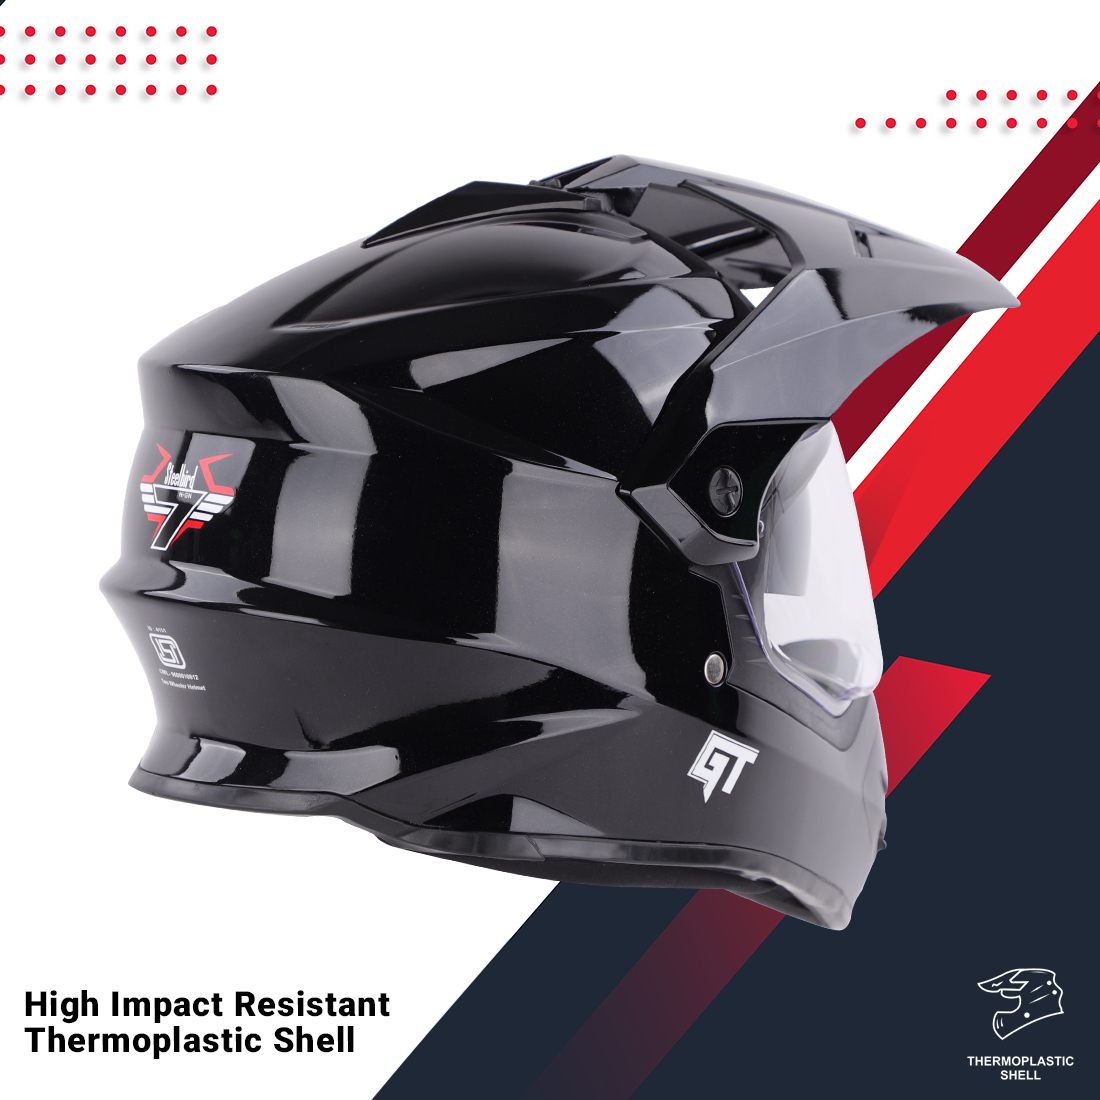 Steelbird Off Road GT ISI Certified Motocross Helmet For Men With Inner Sun Shield (Glossy Black With Clear Visor)